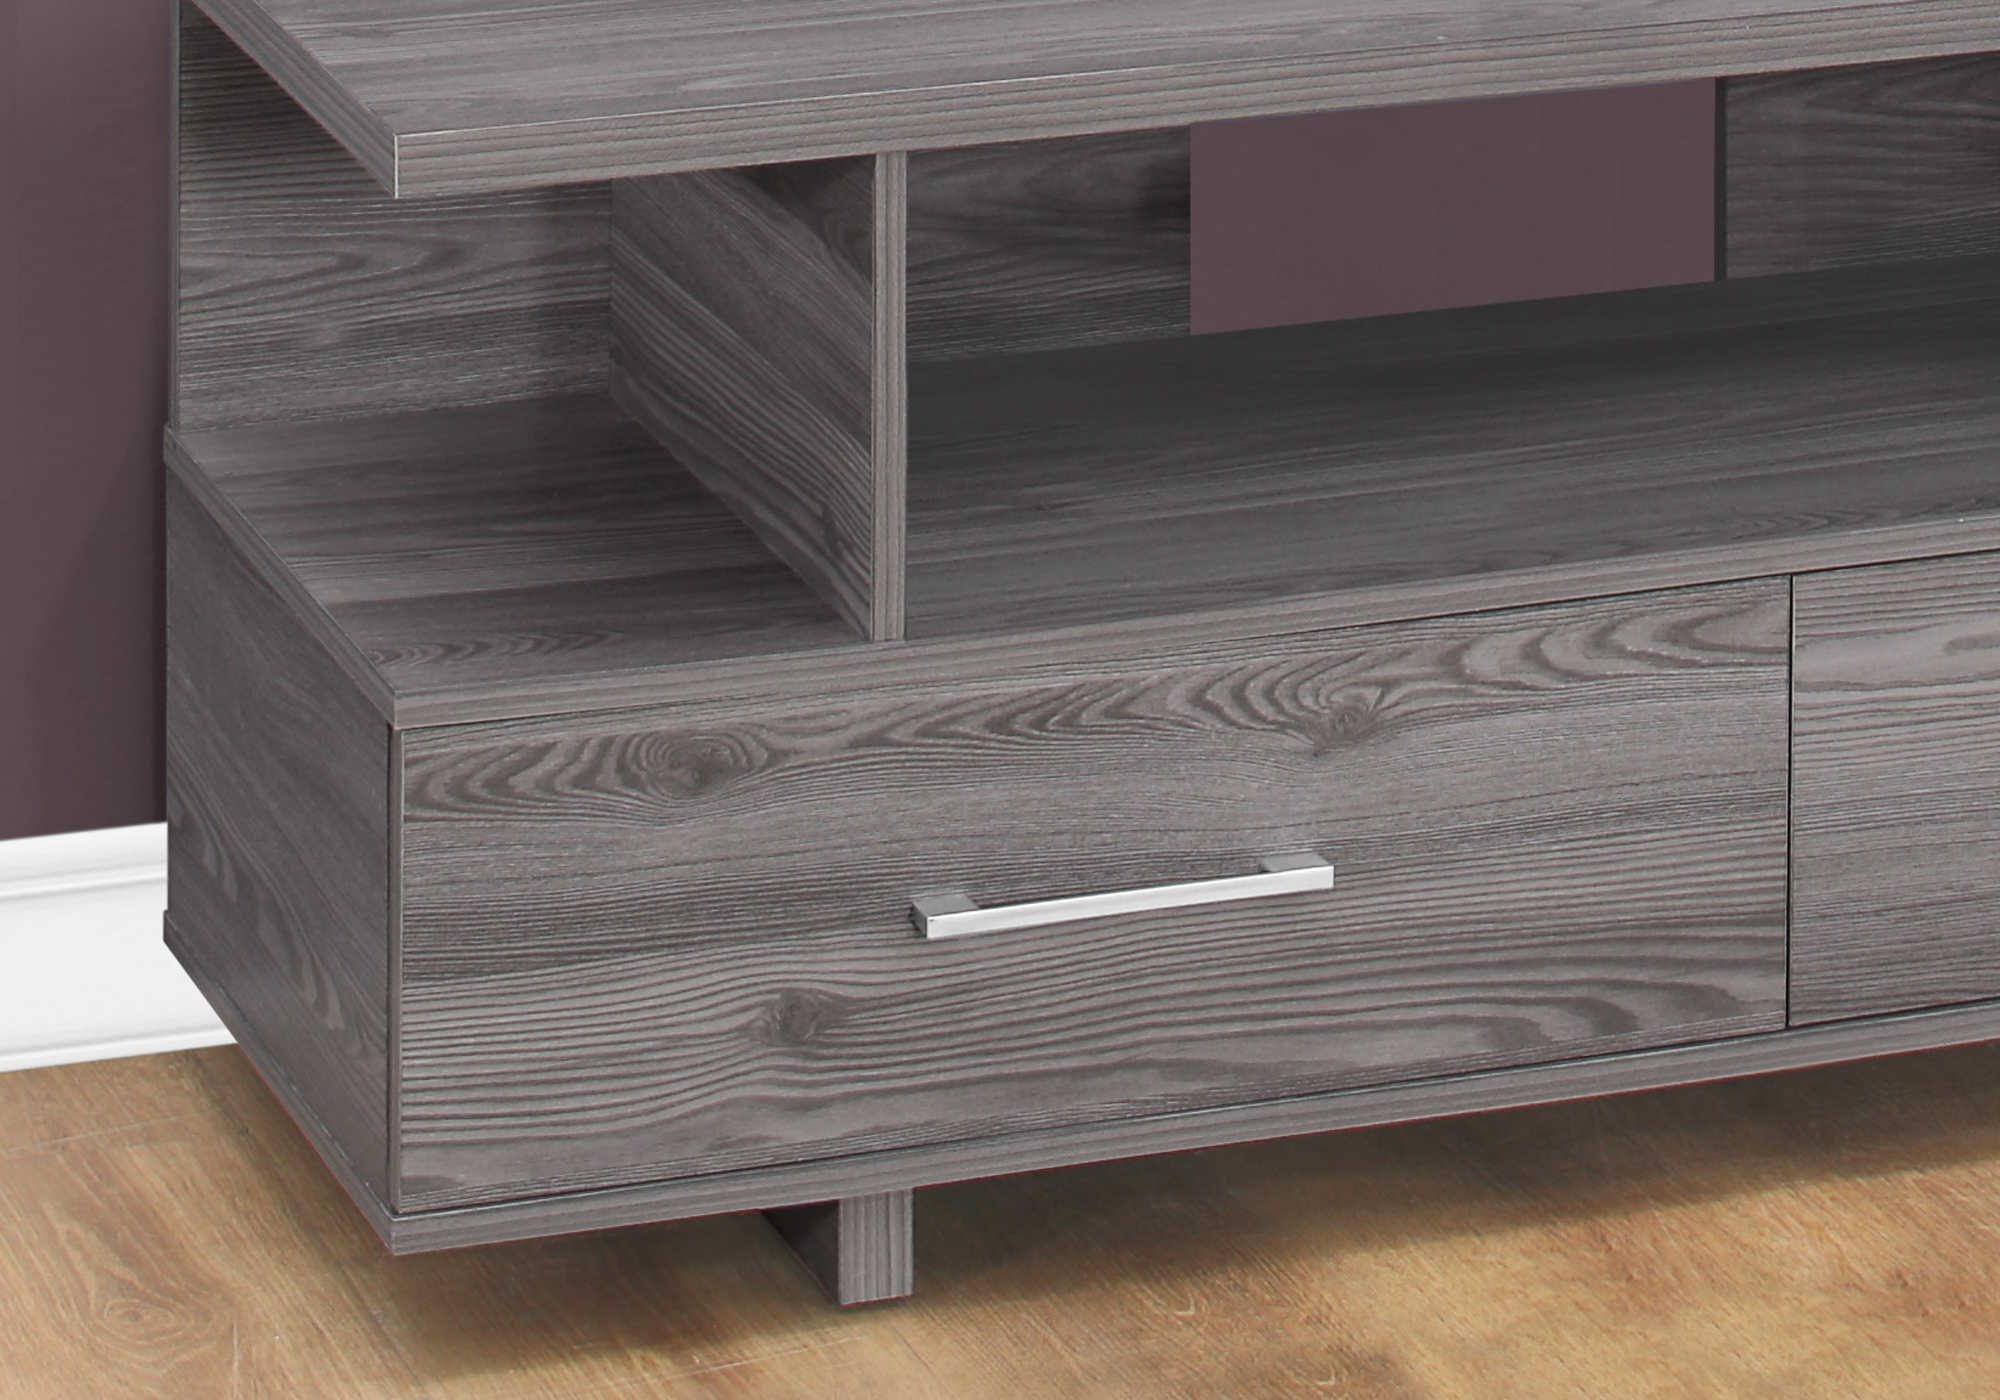 TV STAND - 48"L / GREY WITH 2 STORAGE DRAWERS